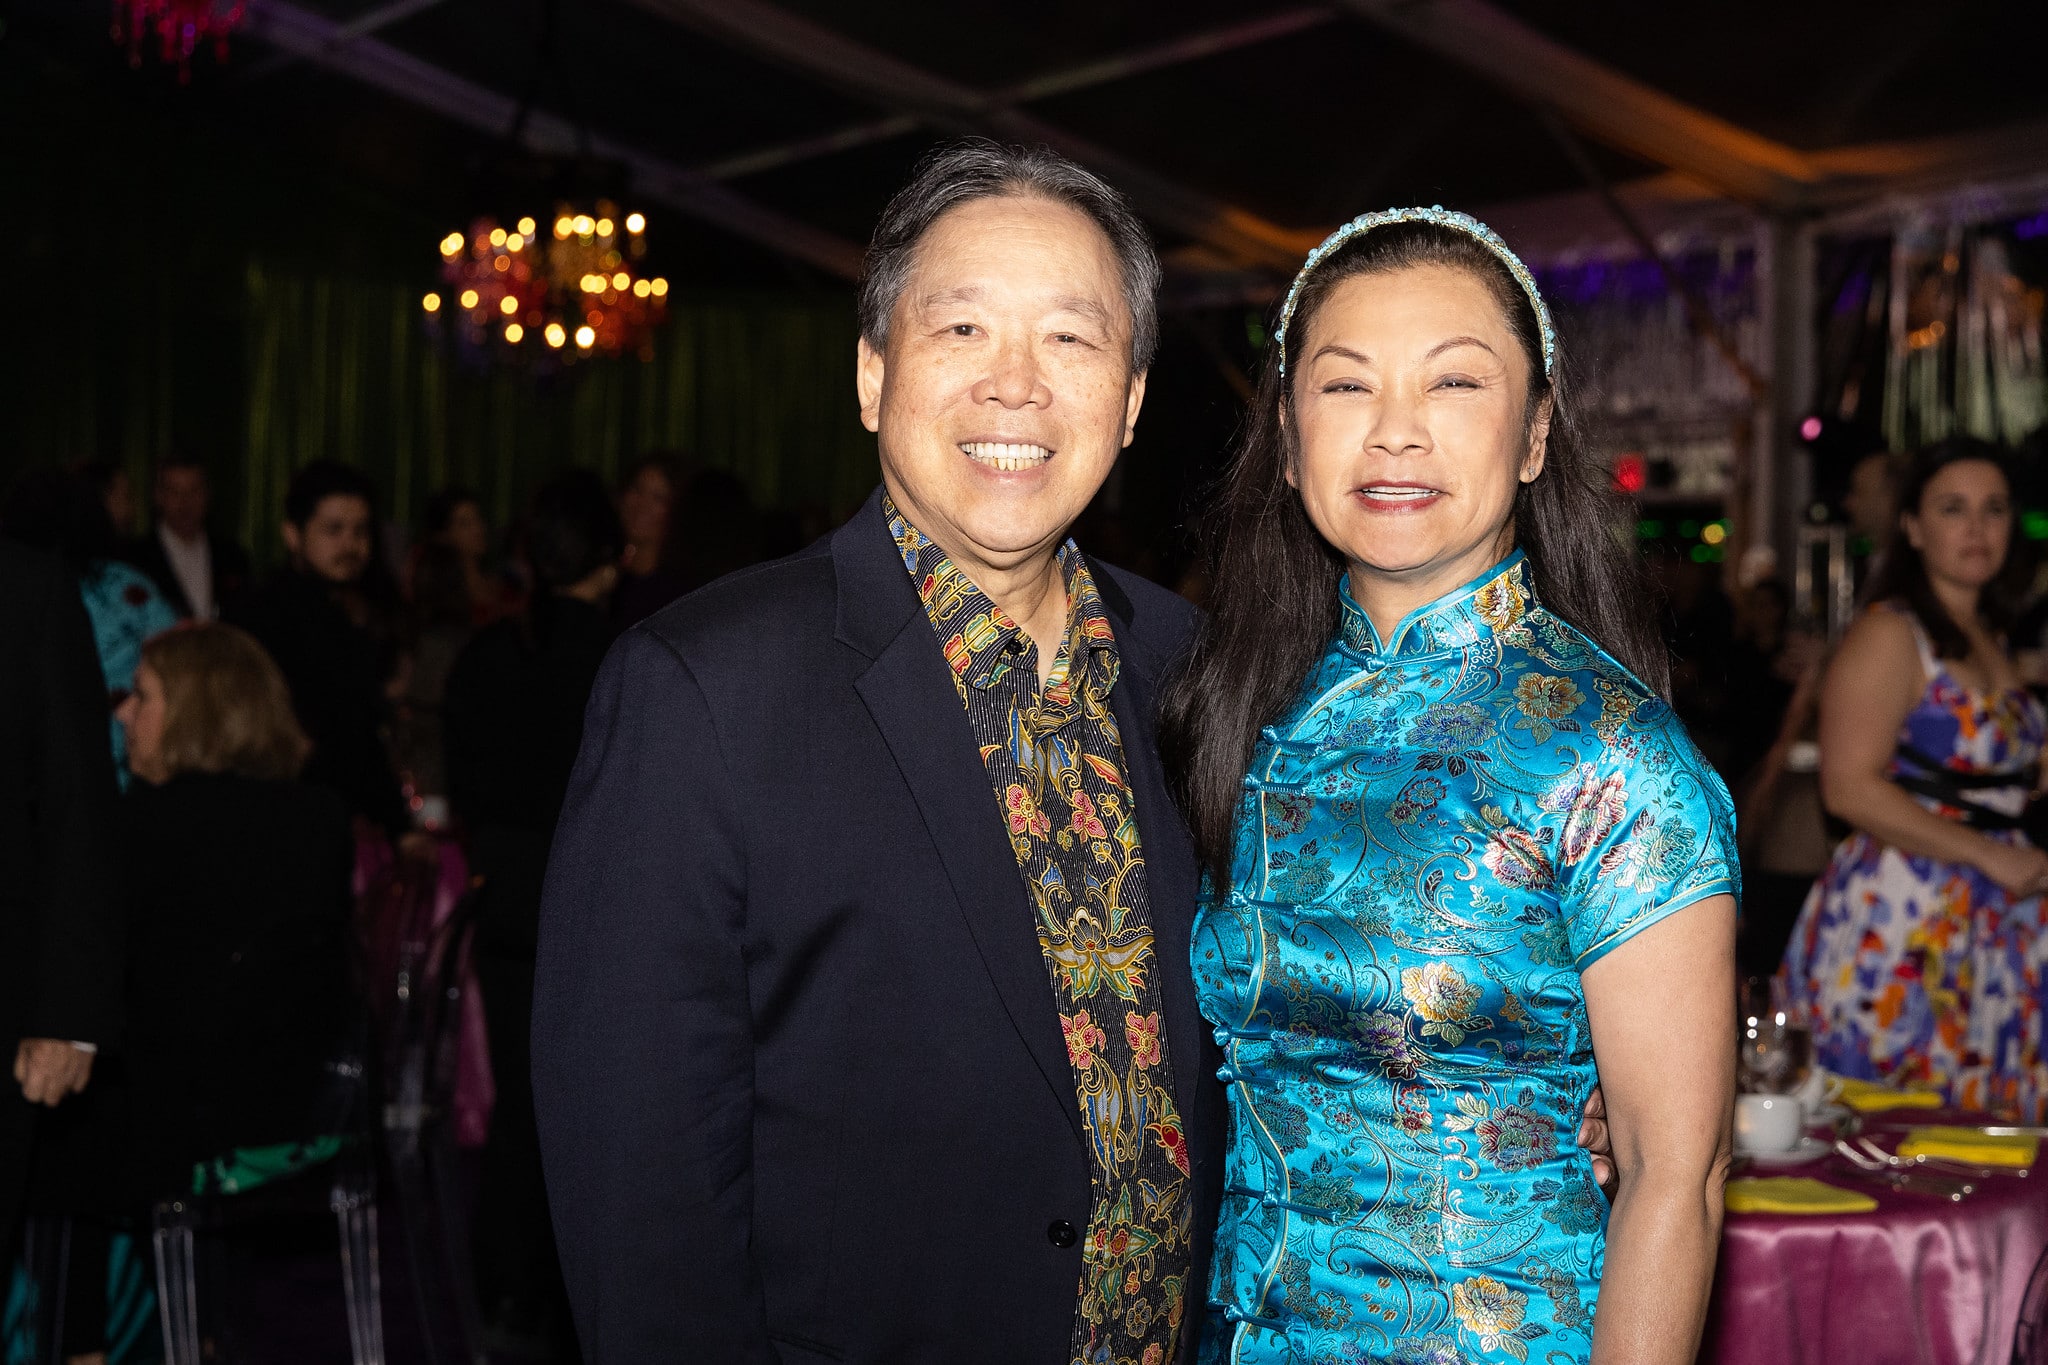 From L-R: Stan Leong, Audrey Leong  Gala on the Green® at Discovery Green in downtown Houston. February 23, 2023. Photo: Lawrence Elizabeth Knox